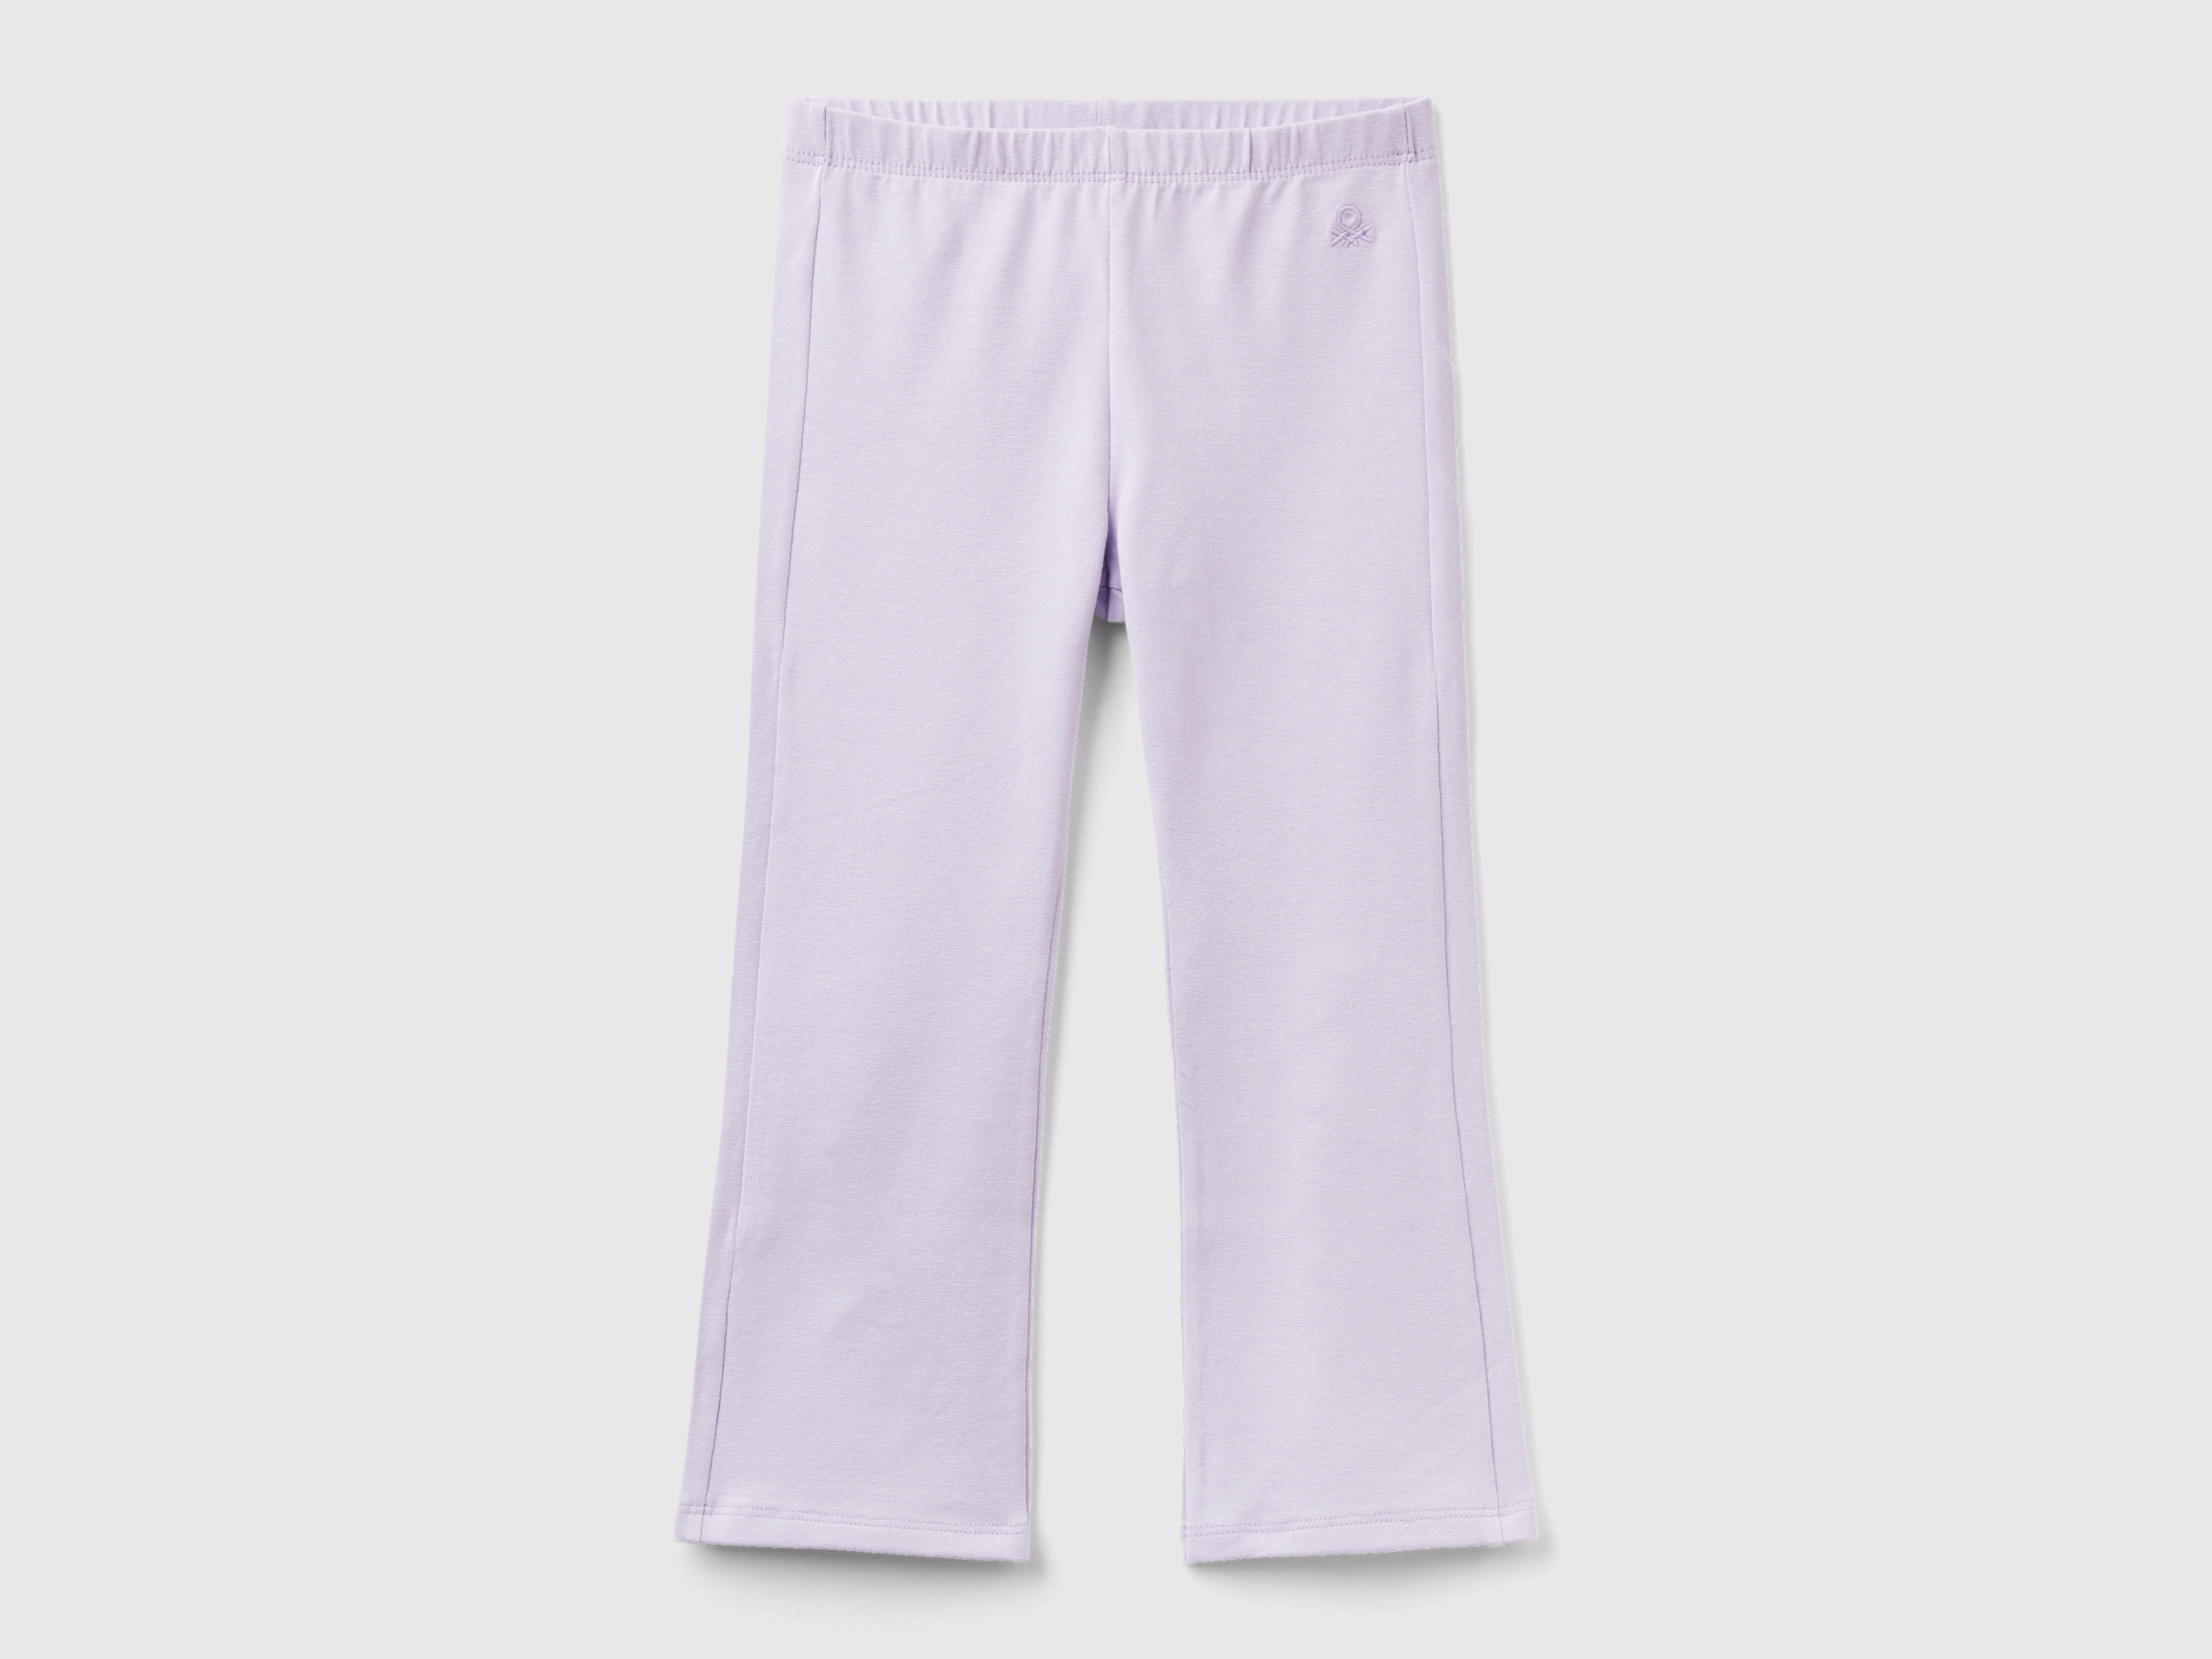 Benetton, Flared Leggings In Stretch Cotton, size 3-4, Lilac, Kids